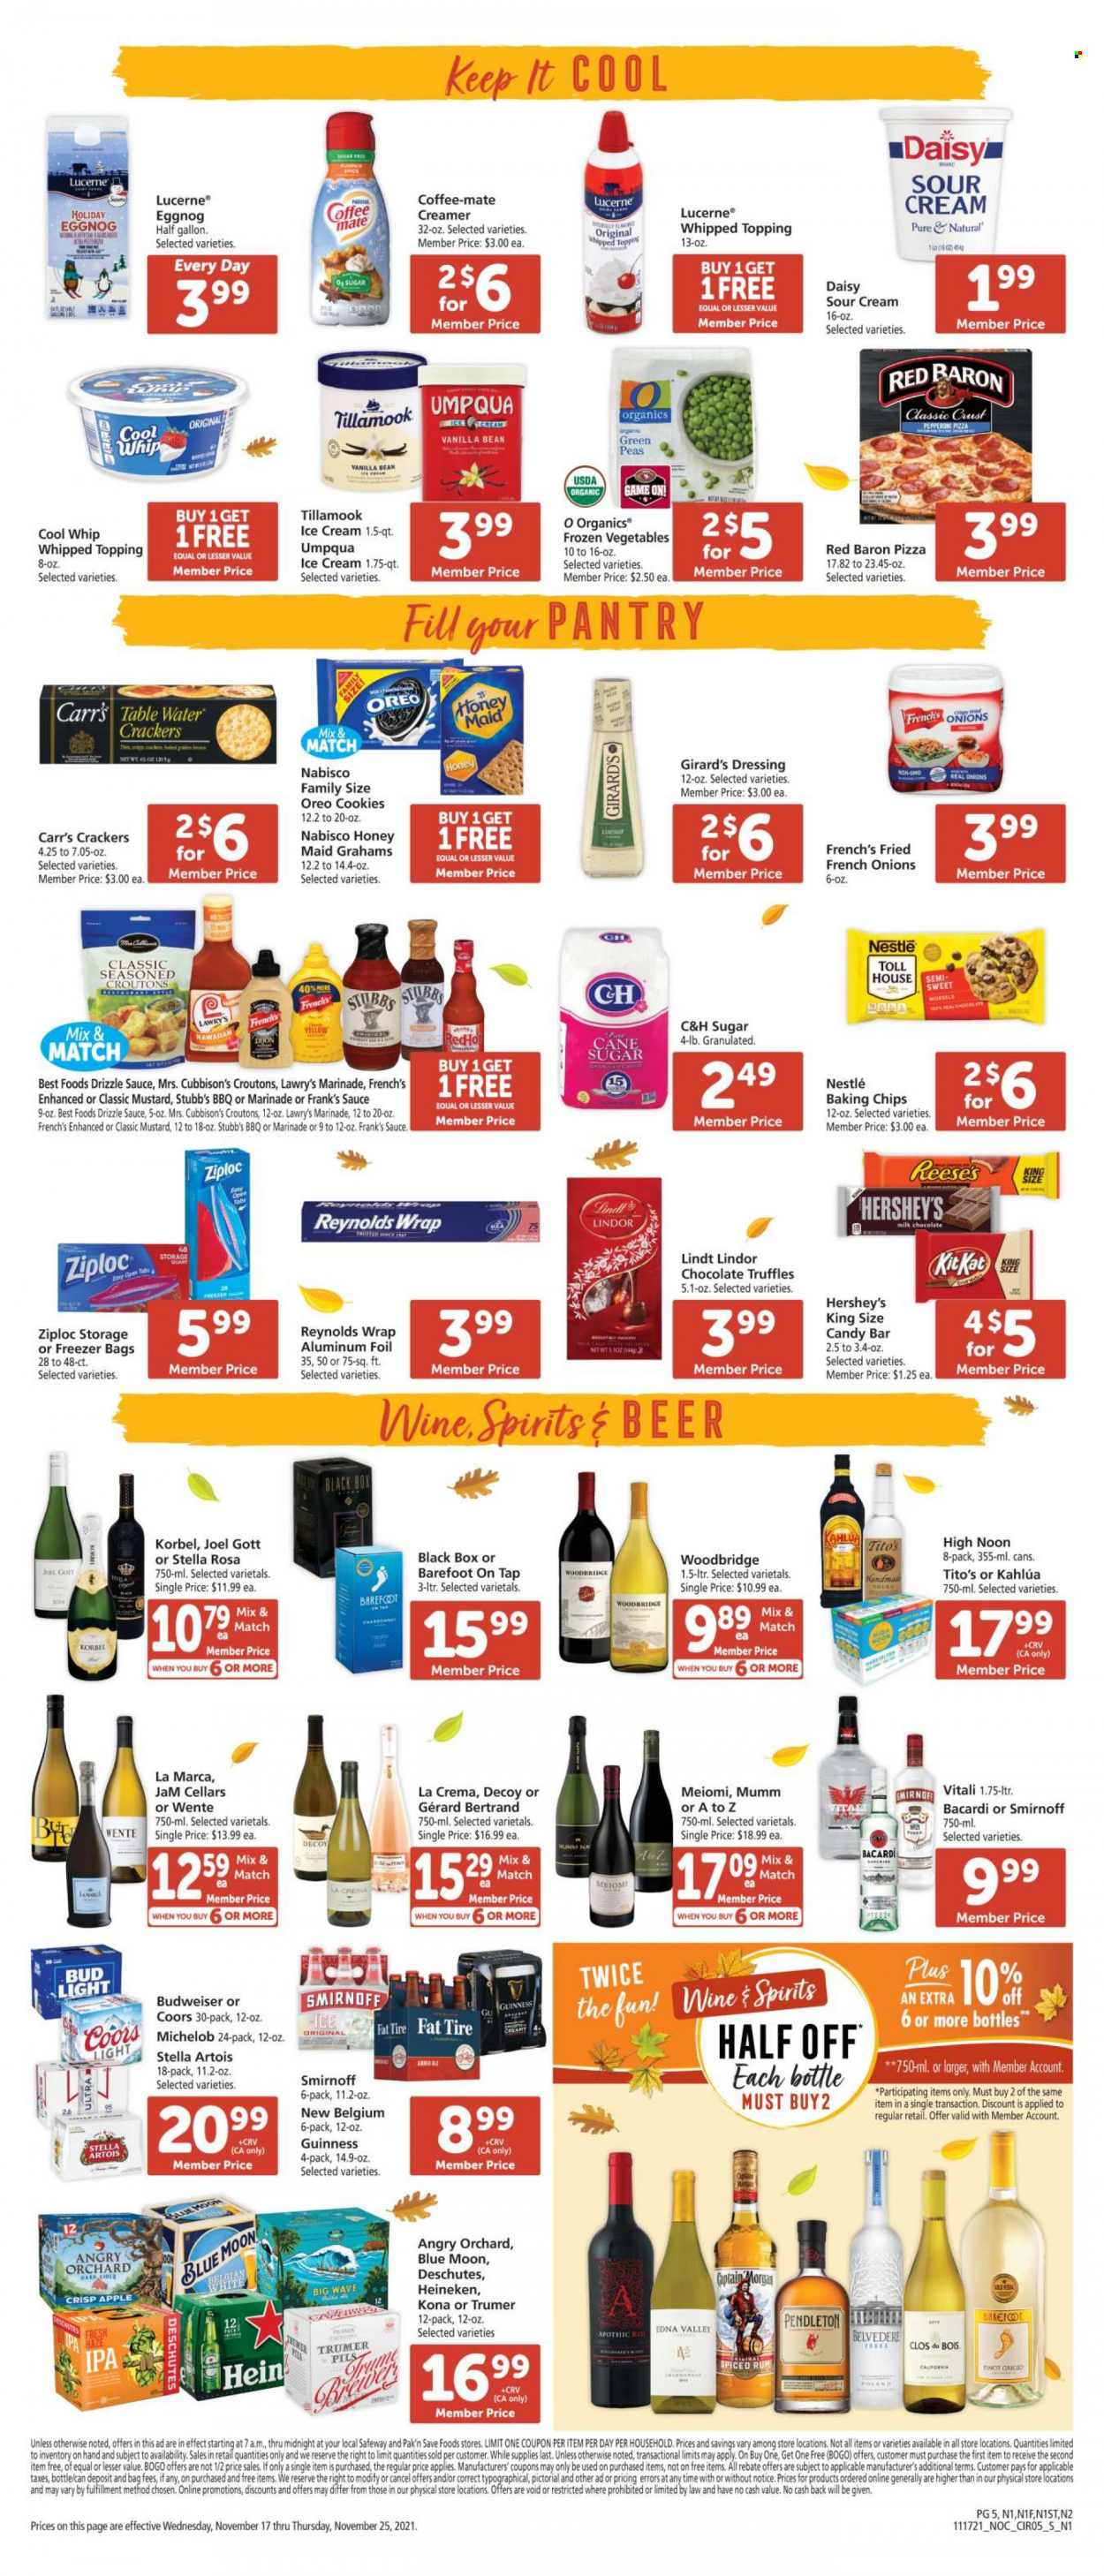 thumbnail - Safeway Flyer - 11/17/2021 - 11/25/2021 - Sales products - peas, pizza, pepperoni, Oreo, Coffee-Mate, Cool Whip, creamer, ice cream, Reese's, Hershey's, frozen vegetables, Red Baron, cookies, milk chocolate, Nestlé, Lindt, Lindor, truffles, crackers, cane sugar, croutons, sugar, topping, baking chips, Honey Maid, mustard, dressing, marinade, Kahlúa, Bacardi, eggnog, rum, Smirnoff, spiced rum, cider, beer, Bud Light, Heineken, Guinness, IPA, WAVE, Ziploc, aluminium foil, freezer bag, Budweiser, Stella Artois, Coors, Blue Moon, Michelob. Page 5.